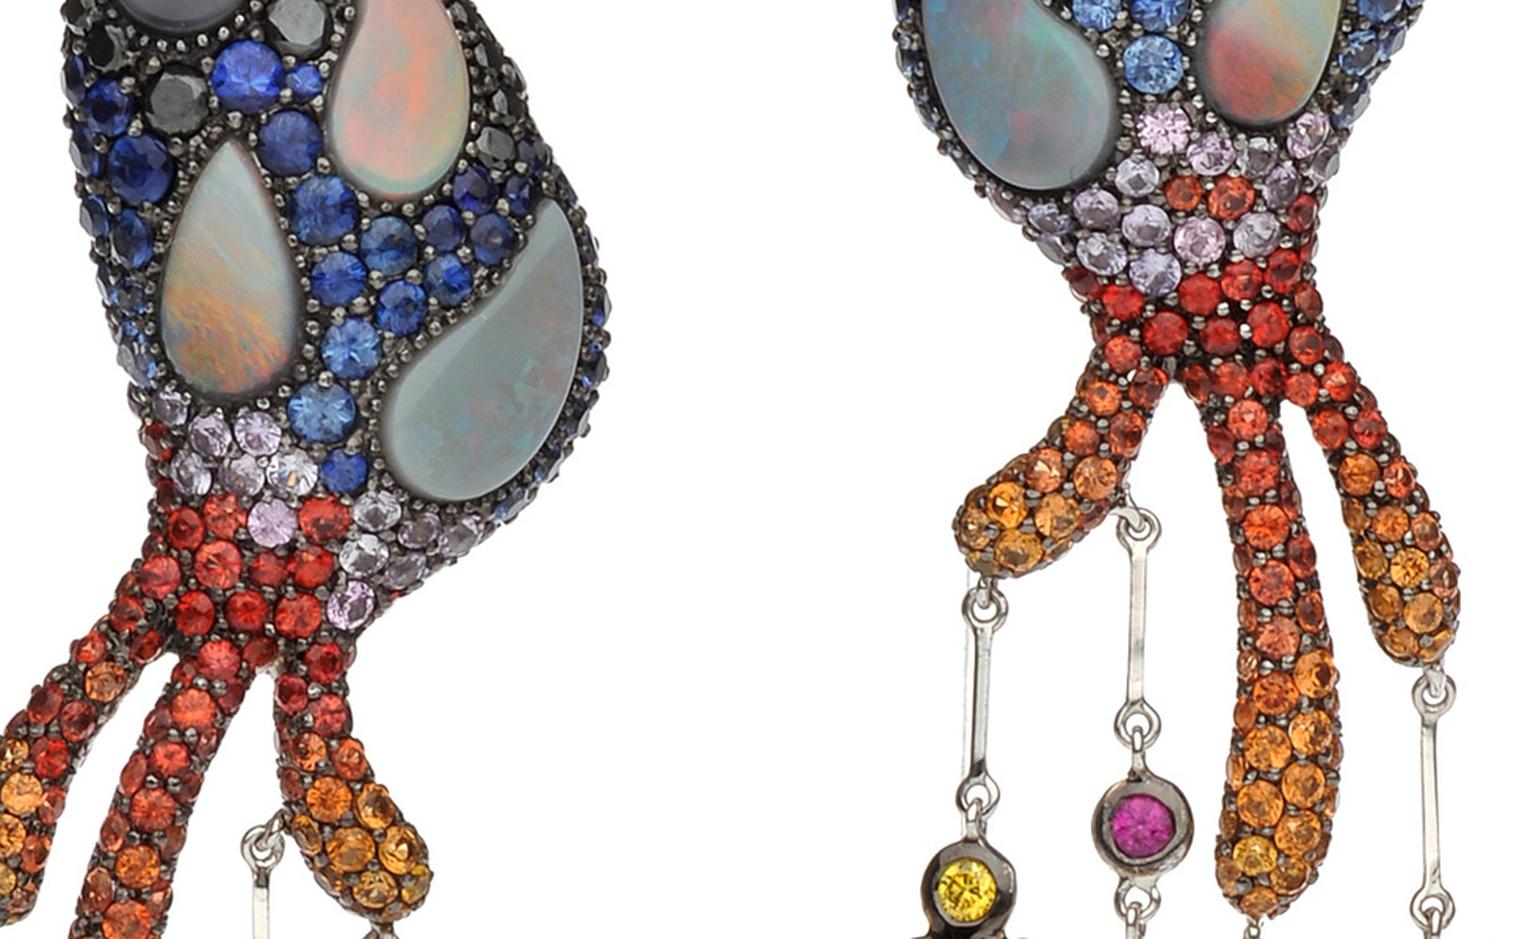 Autore, Fire & Ice Santorini Earrings in white and rose gold with Other-wordly opals and red hot orange and yellow sapphires make unlikely combinations in these Autore earrings. $55,000 AUD